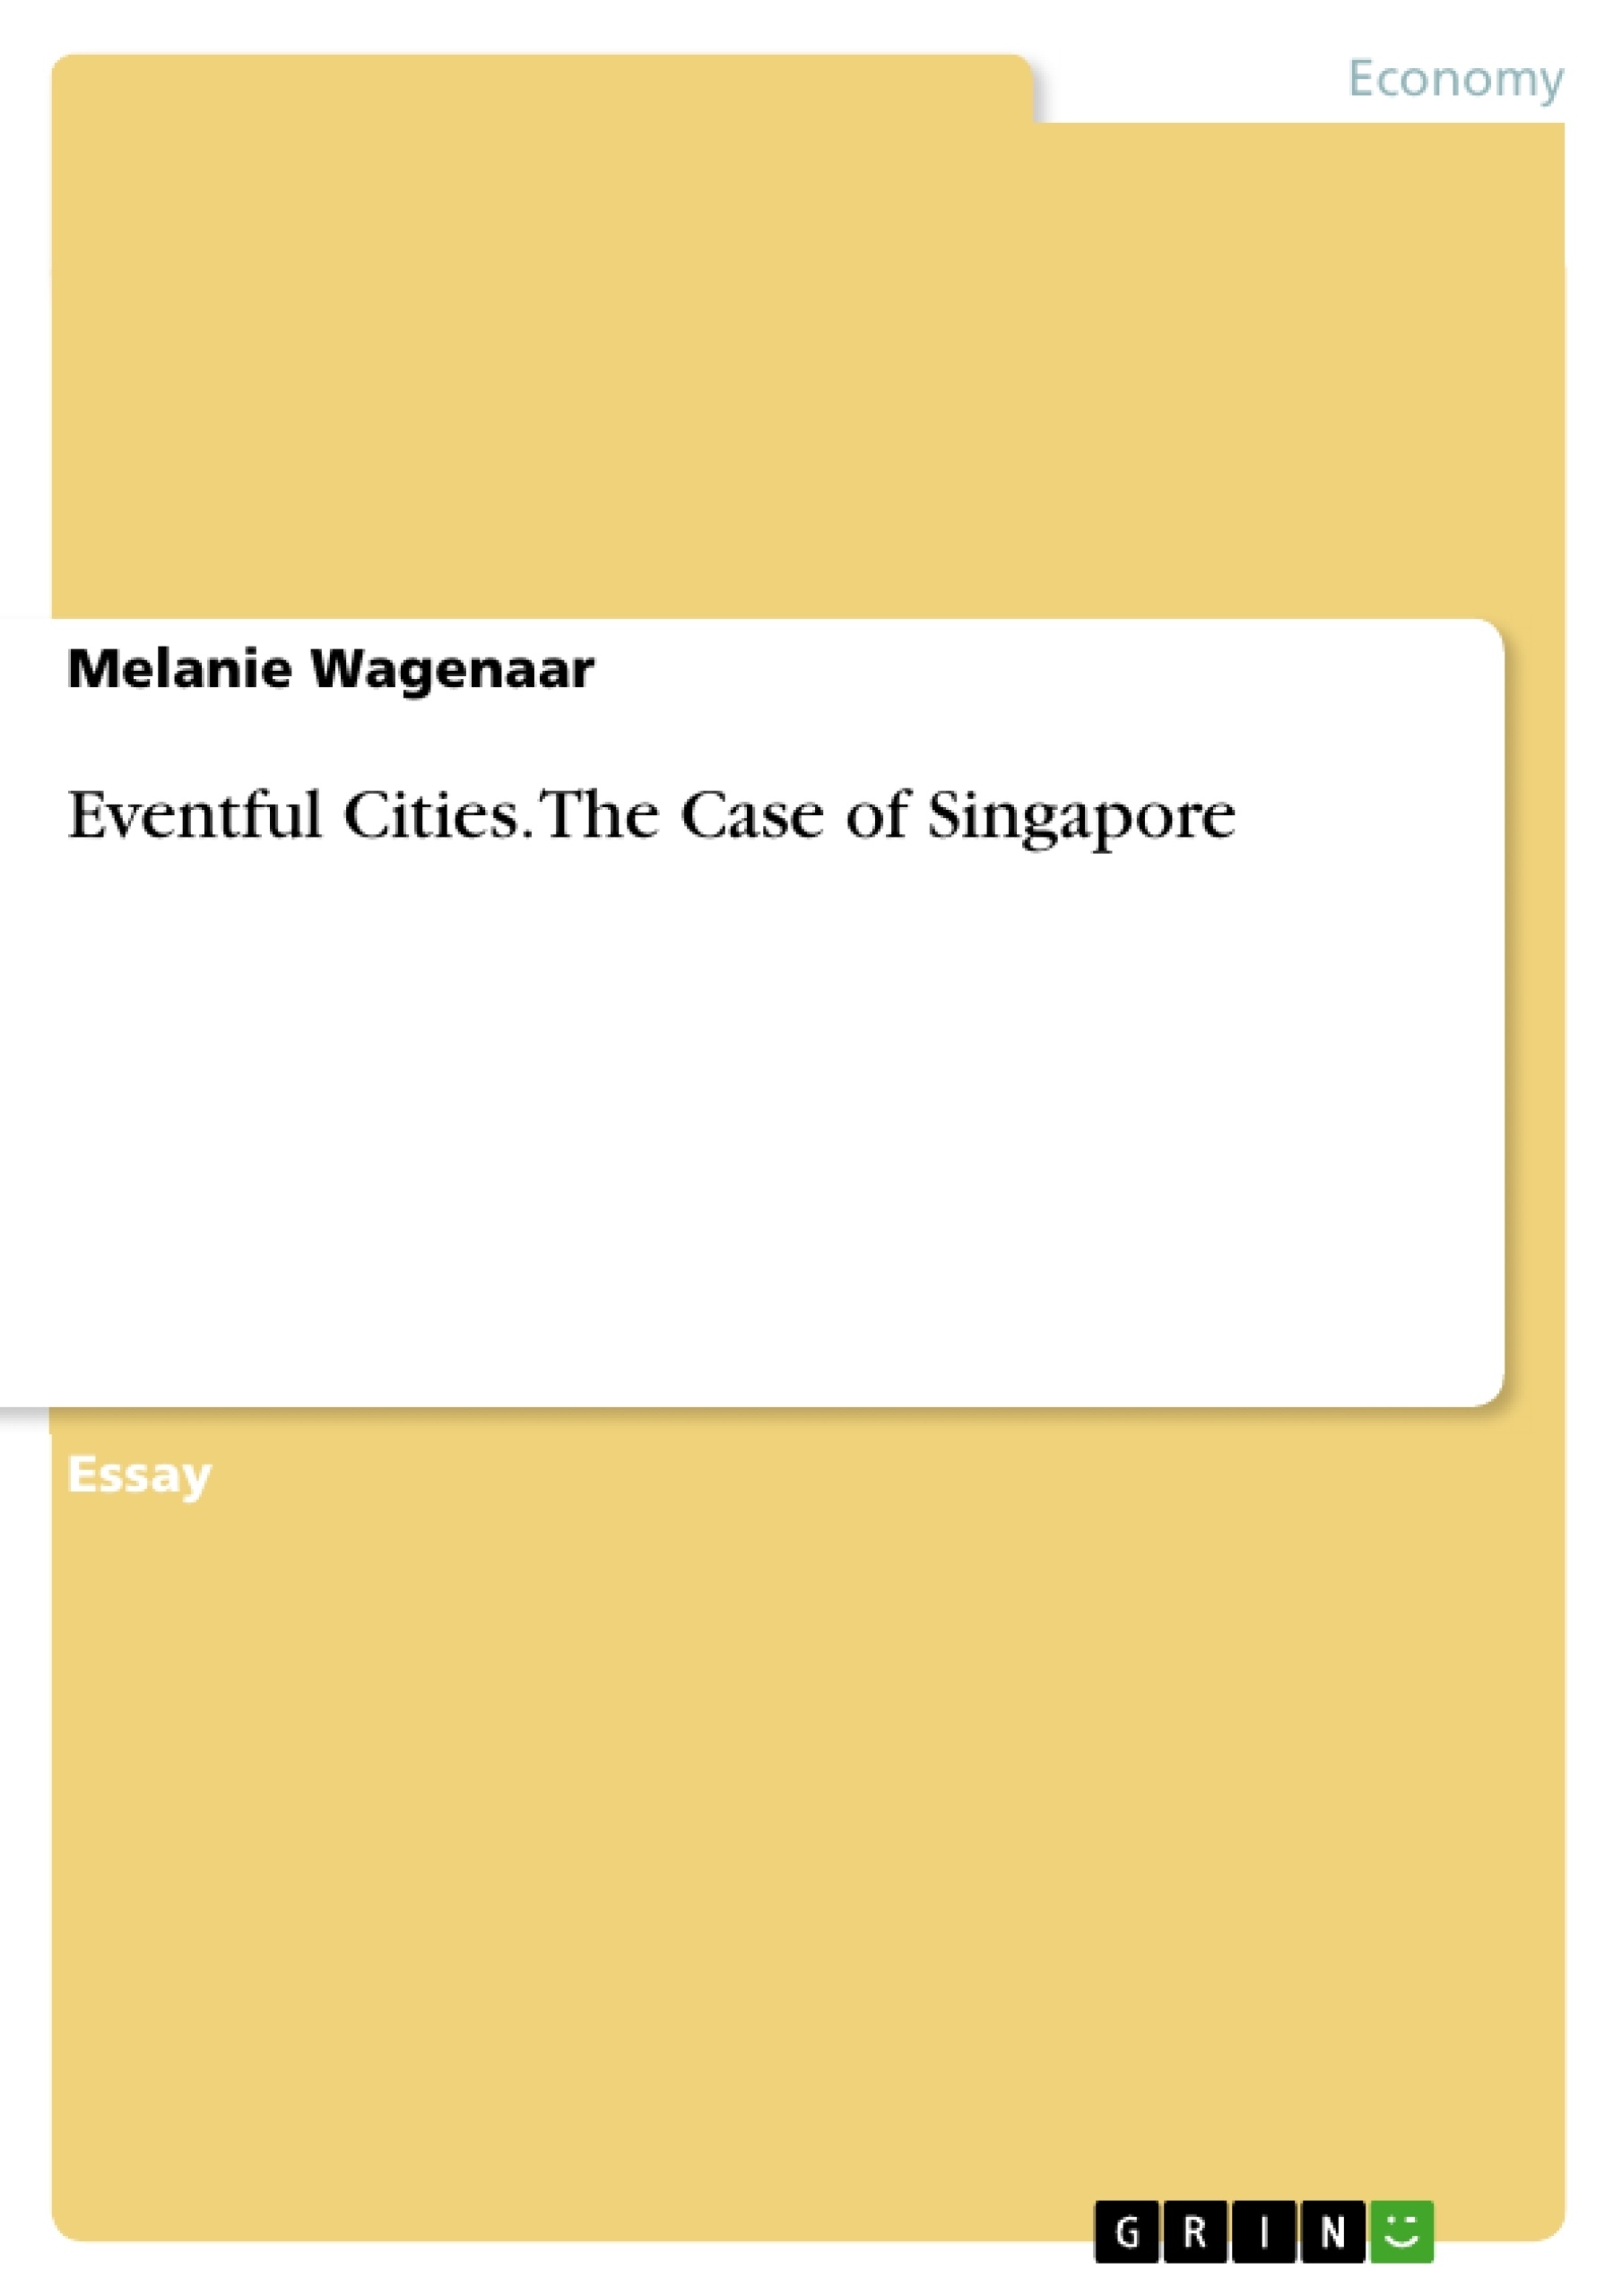 Title: Eventful Cities. The Case of Singapore